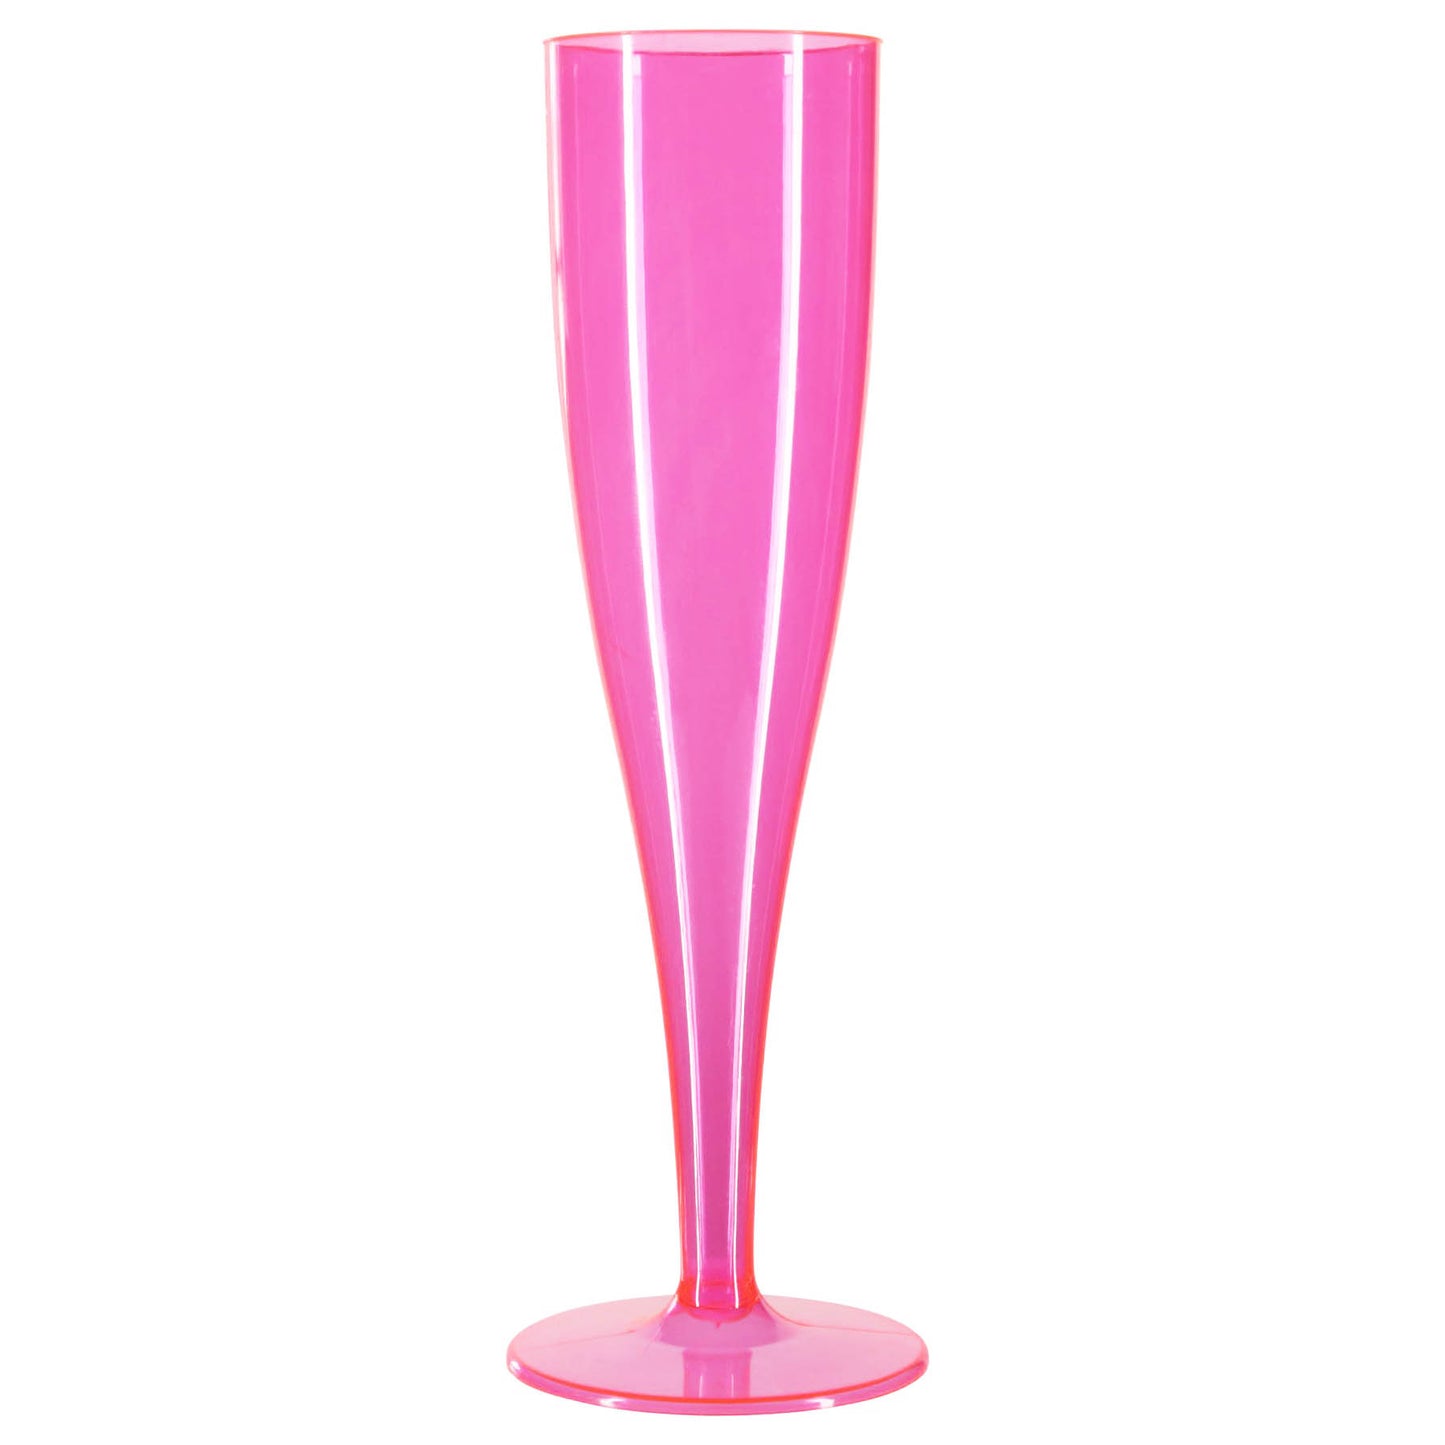 50 x Pink Prosecco Flutes 175ml 6oz Capacity Recyclable Polystyrene Material Transparent 1-Piece Sturdy Champagne Glasses BBQs Picnics-5056020107156-PCUP-CHAMPPINKx5-Product Pro-Champagne Glasses, Clear Champagne Glasses, Pink, Plastic Flutes, Prosecco Flutes